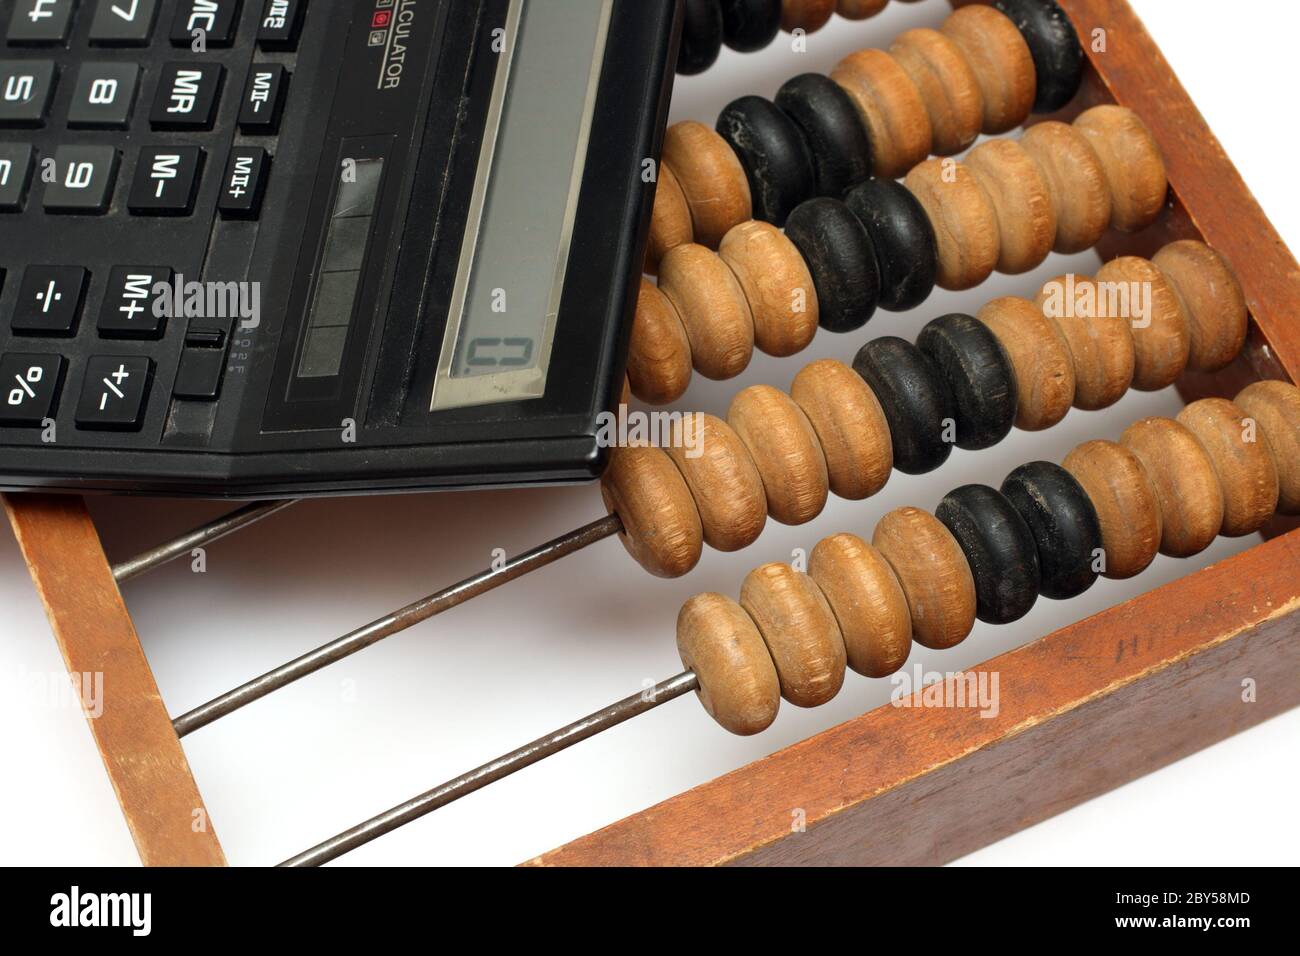 old wooden abacus and electronic calculator Stock Photo